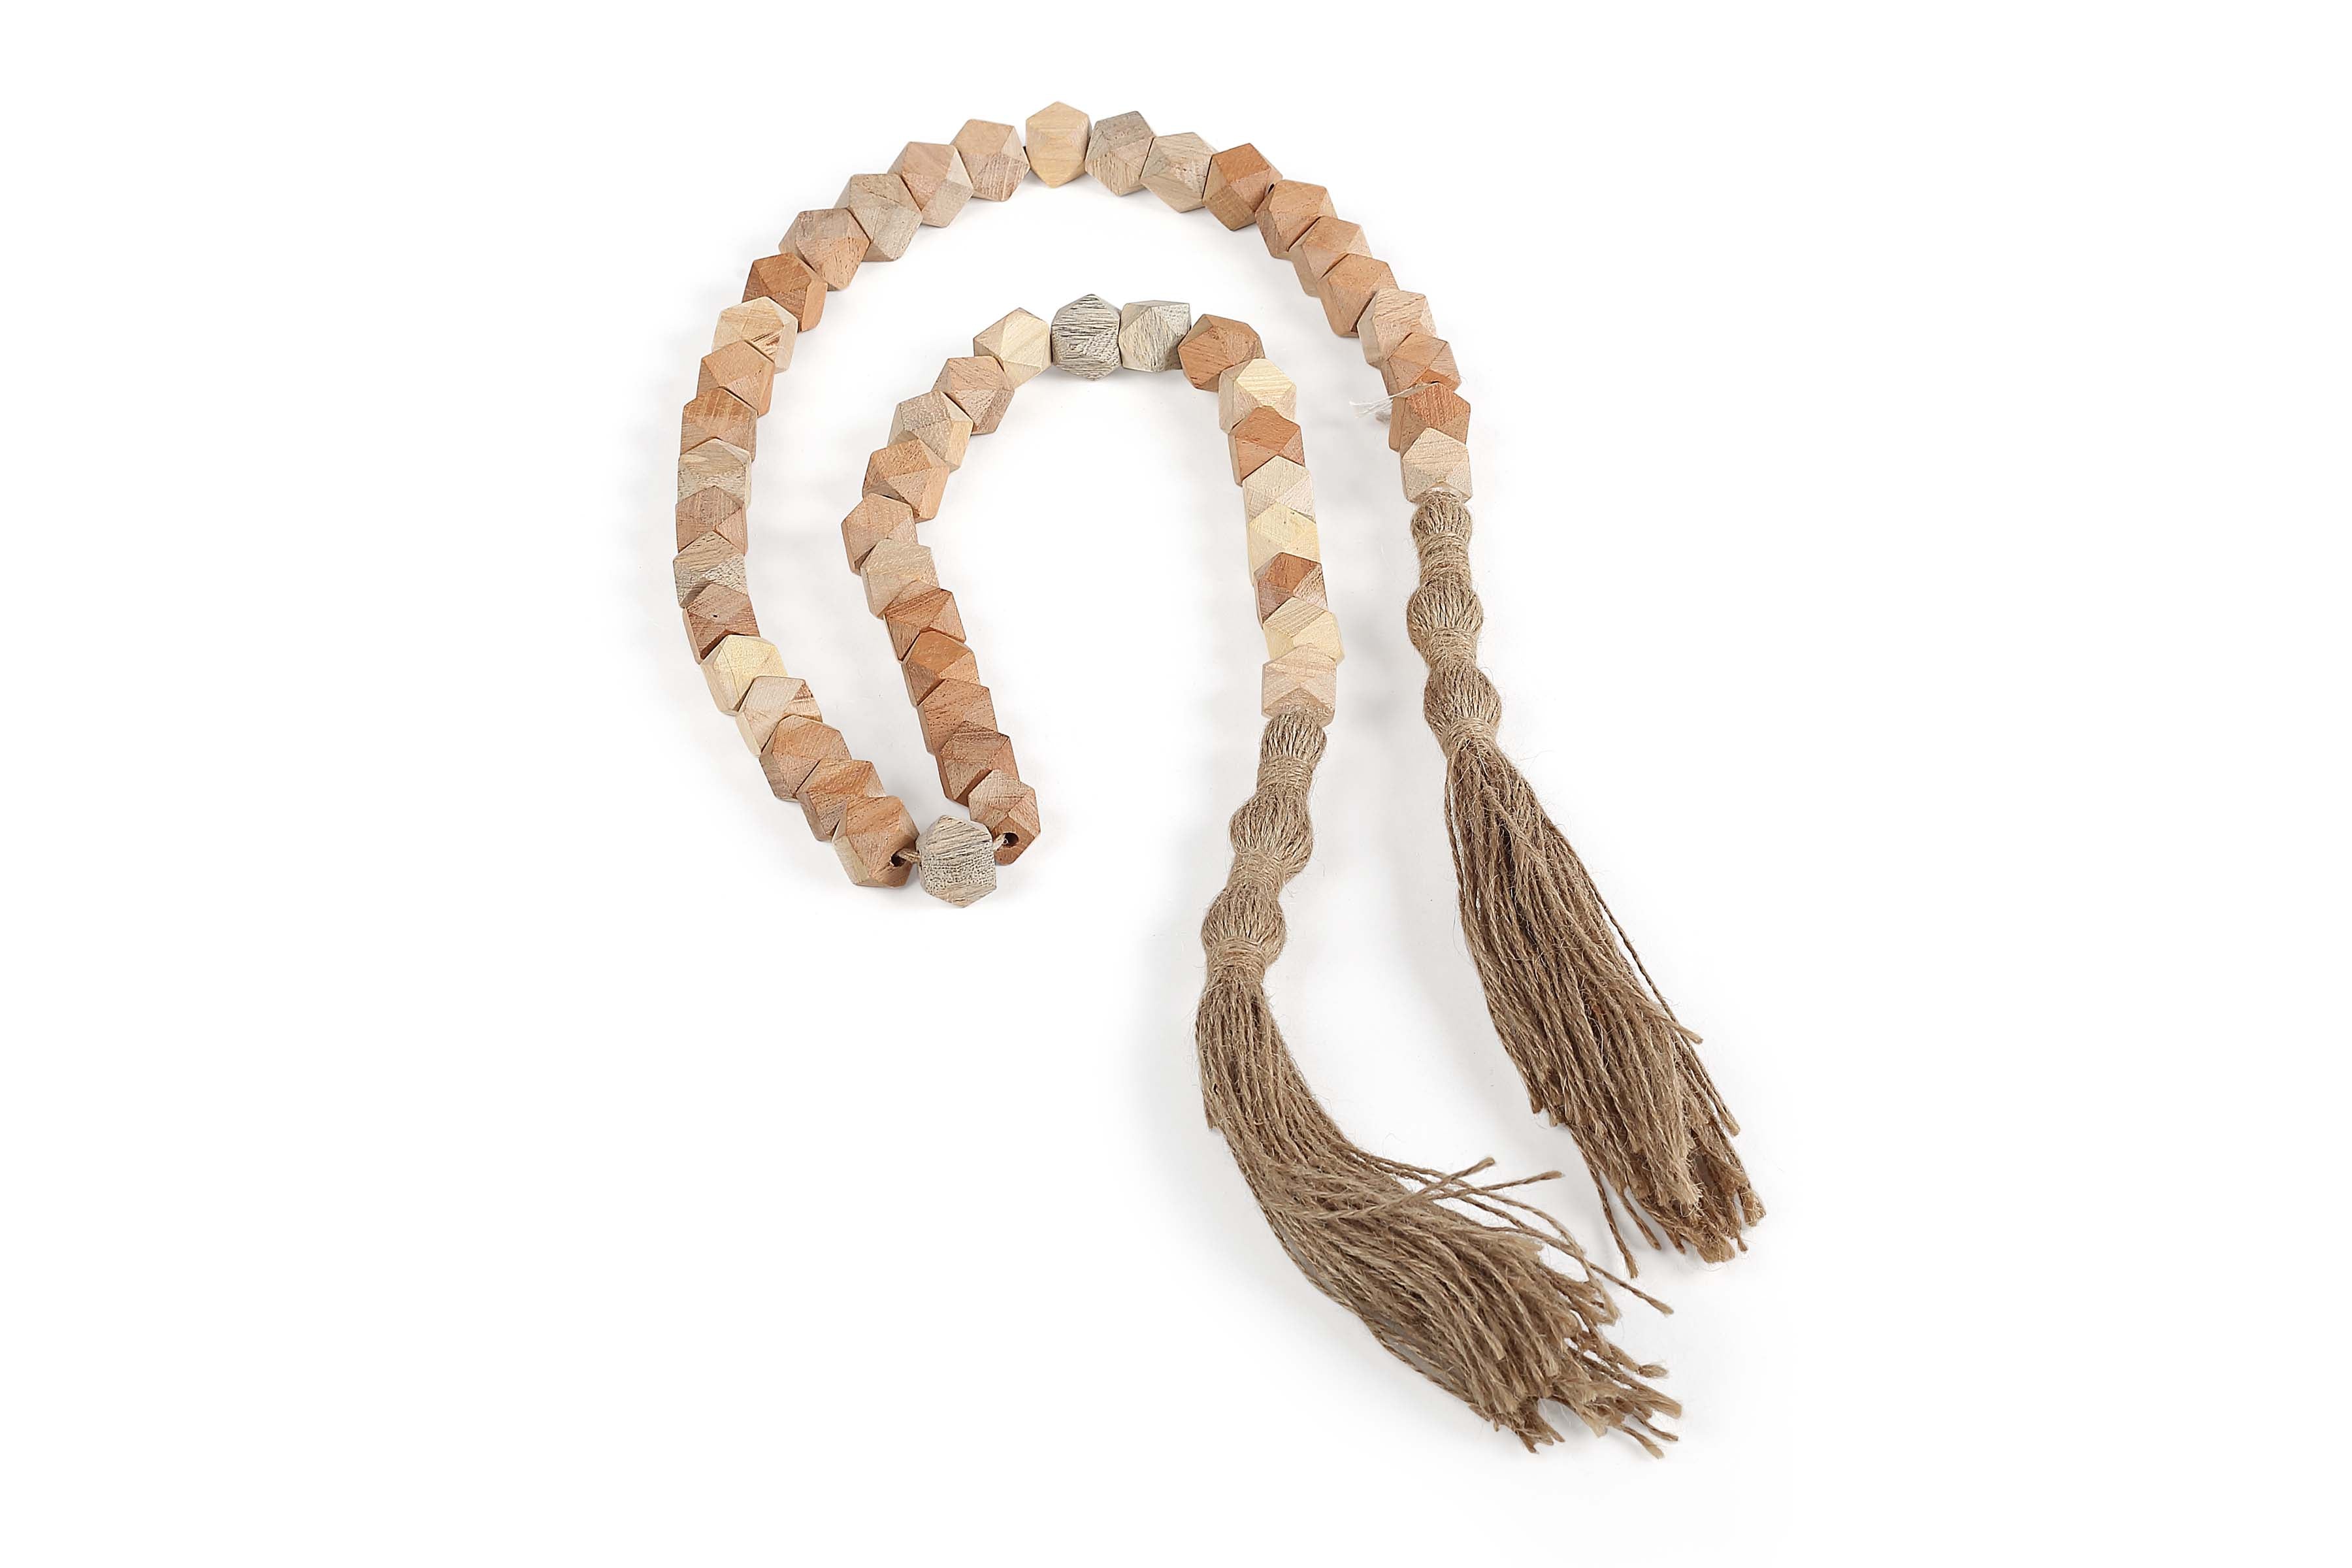 Fall Wooden Geometric Beads Garland with Jute Tassel-39inches (Set of 3)